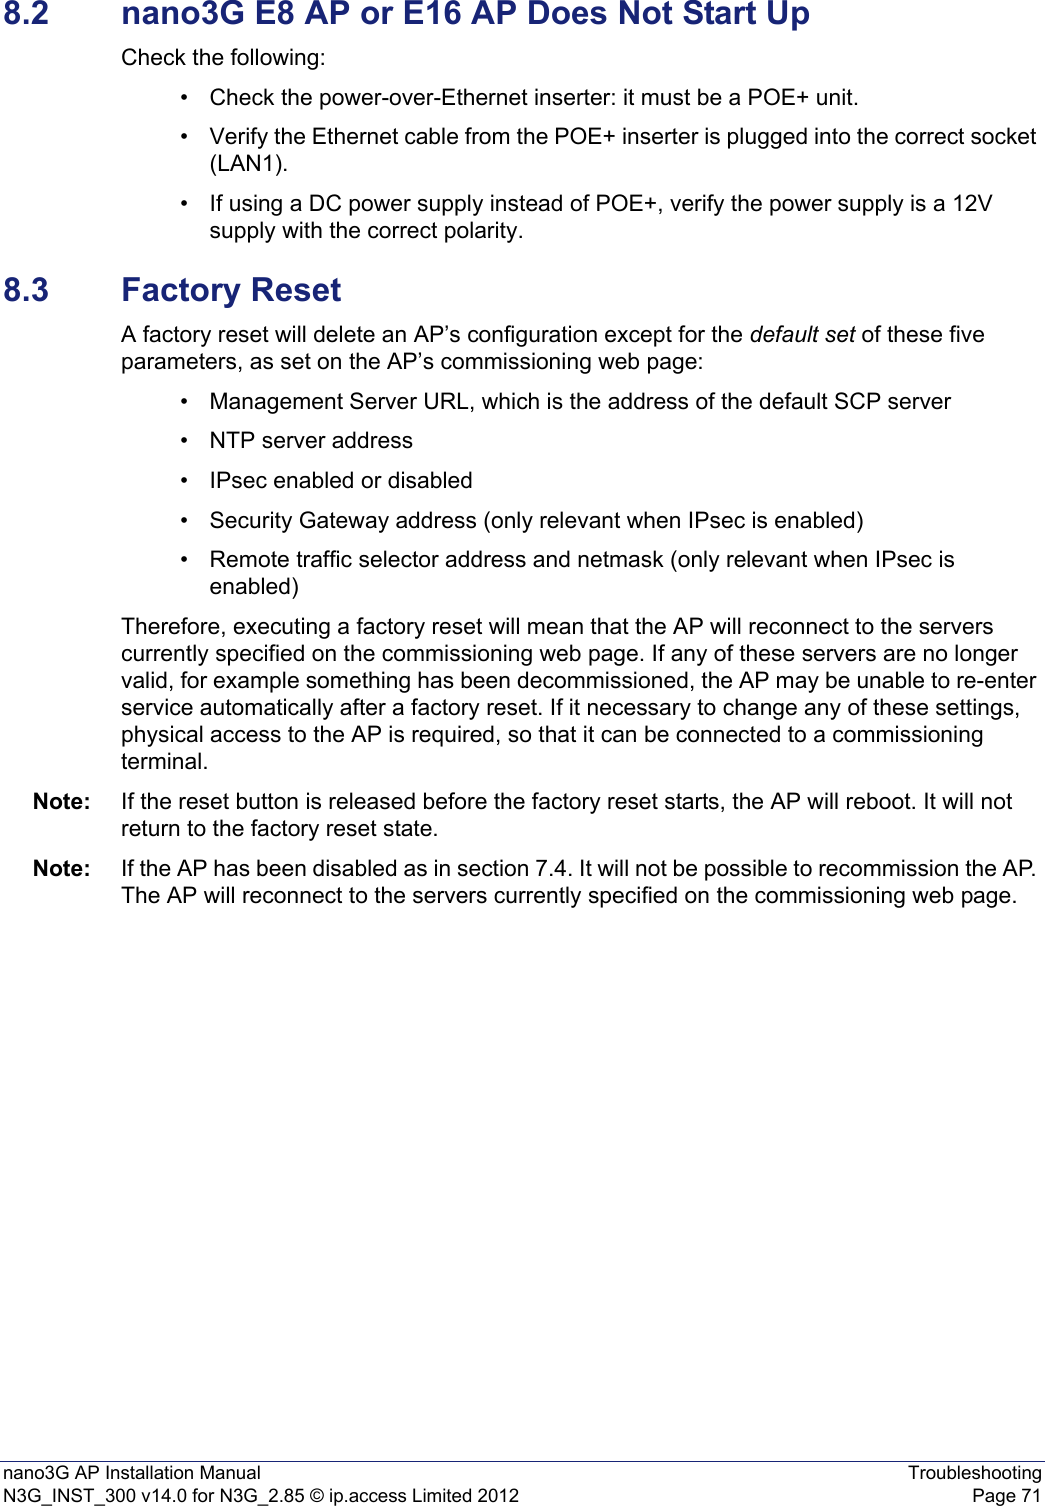 nano3G AP Installation Manual TroubleshootingN3G_INST_300 v14.0 for N3G_2.85 © ip.access Limited 2012 Page 718.2 nano3G E8 AP or E16 AP Does Not Start UpCheck the following:• Check the power-over-Ethernet inserter: it must be a POE+ unit.• Verify the Ethernet cable from the POE+ inserter is plugged into the correct socket (LAN1).• If using a DC power supply instead of POE+, verify the power supply is a 12V supply with the correct polarity.8.3 Factory ResetA factory reset will delete an AP’s configuration except for the default set of these five parameters, as set on the AP’s commissioning web page:• Management Server URL, which is the address of the default SCP server• NTP server address• IPsec enabled or disabled• Security Gateway address (only relevant when IPsec is enabled)• Remote traffic selector address and netmask (only relevant when IPsec is enabled)Therefore, executing a factory reset will mean that the AP will reconnect to the servers currently specified on the commissioning web page. If any of these servers are no longer valid, for example something has been decommissioned, the AP may be unable to re-enter service automatically after a factory reset. If it necessary to change any of these settings, physical access to the AP is required, so that it can be connected to a commissioning terminal.Note: If the reset button is released before the factory reset starts, the AP will reboot. It will not return to the factory reset state.Note: If the AP has been disabled as in section 7.4. It will not be possible to recommission the AP. The AP will reconnect to the servers currently specified on the commissioning web page.